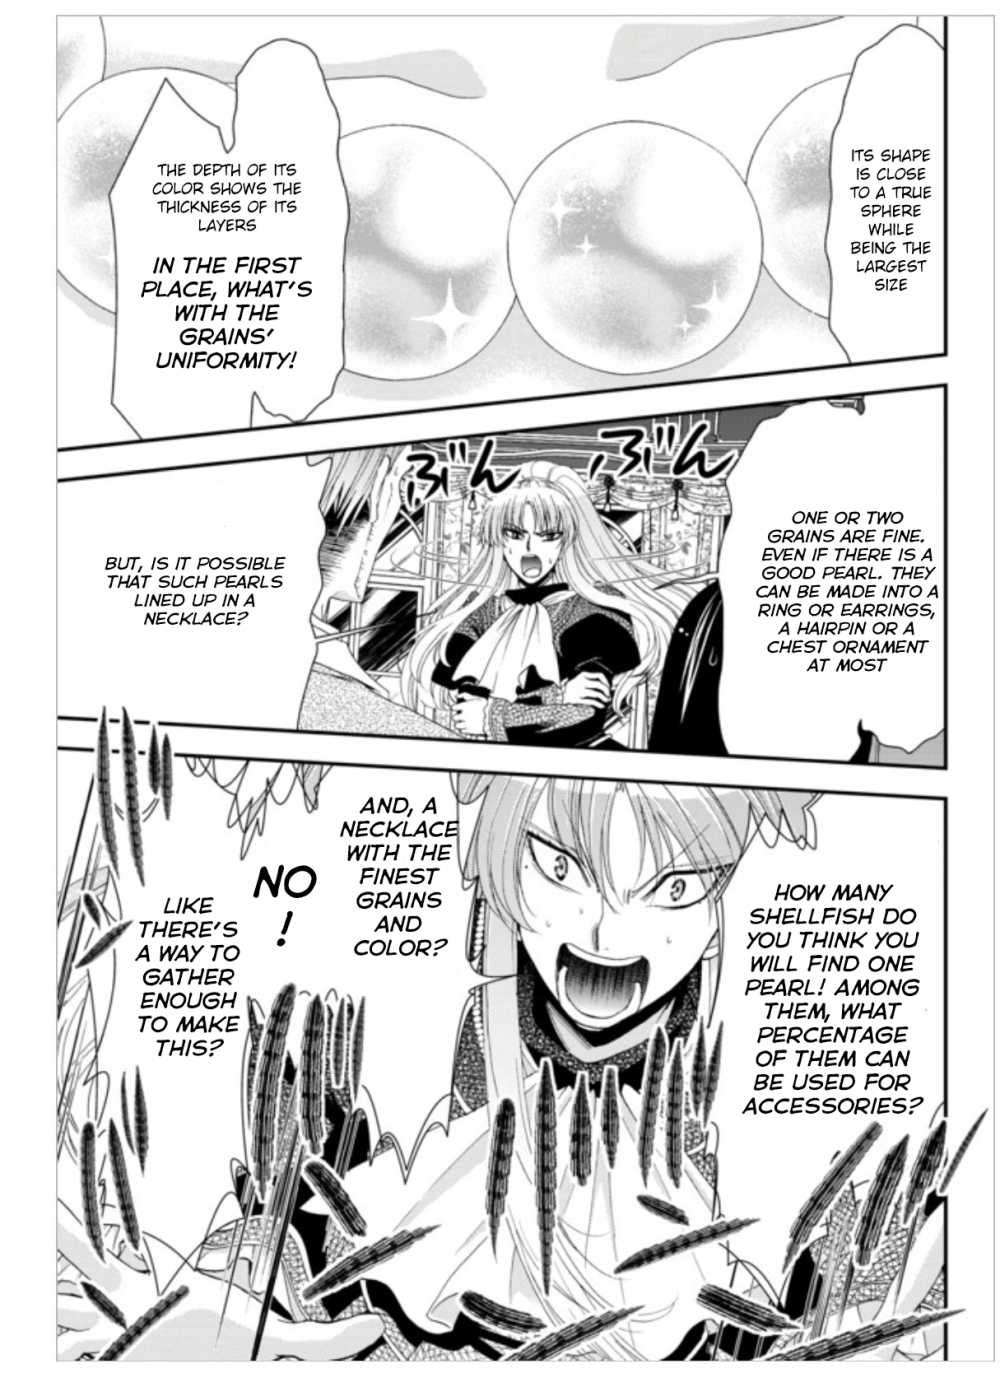 Saving 80,000 Gold Coins in the Different World for My Old Age Vol. 1 Ch. 7